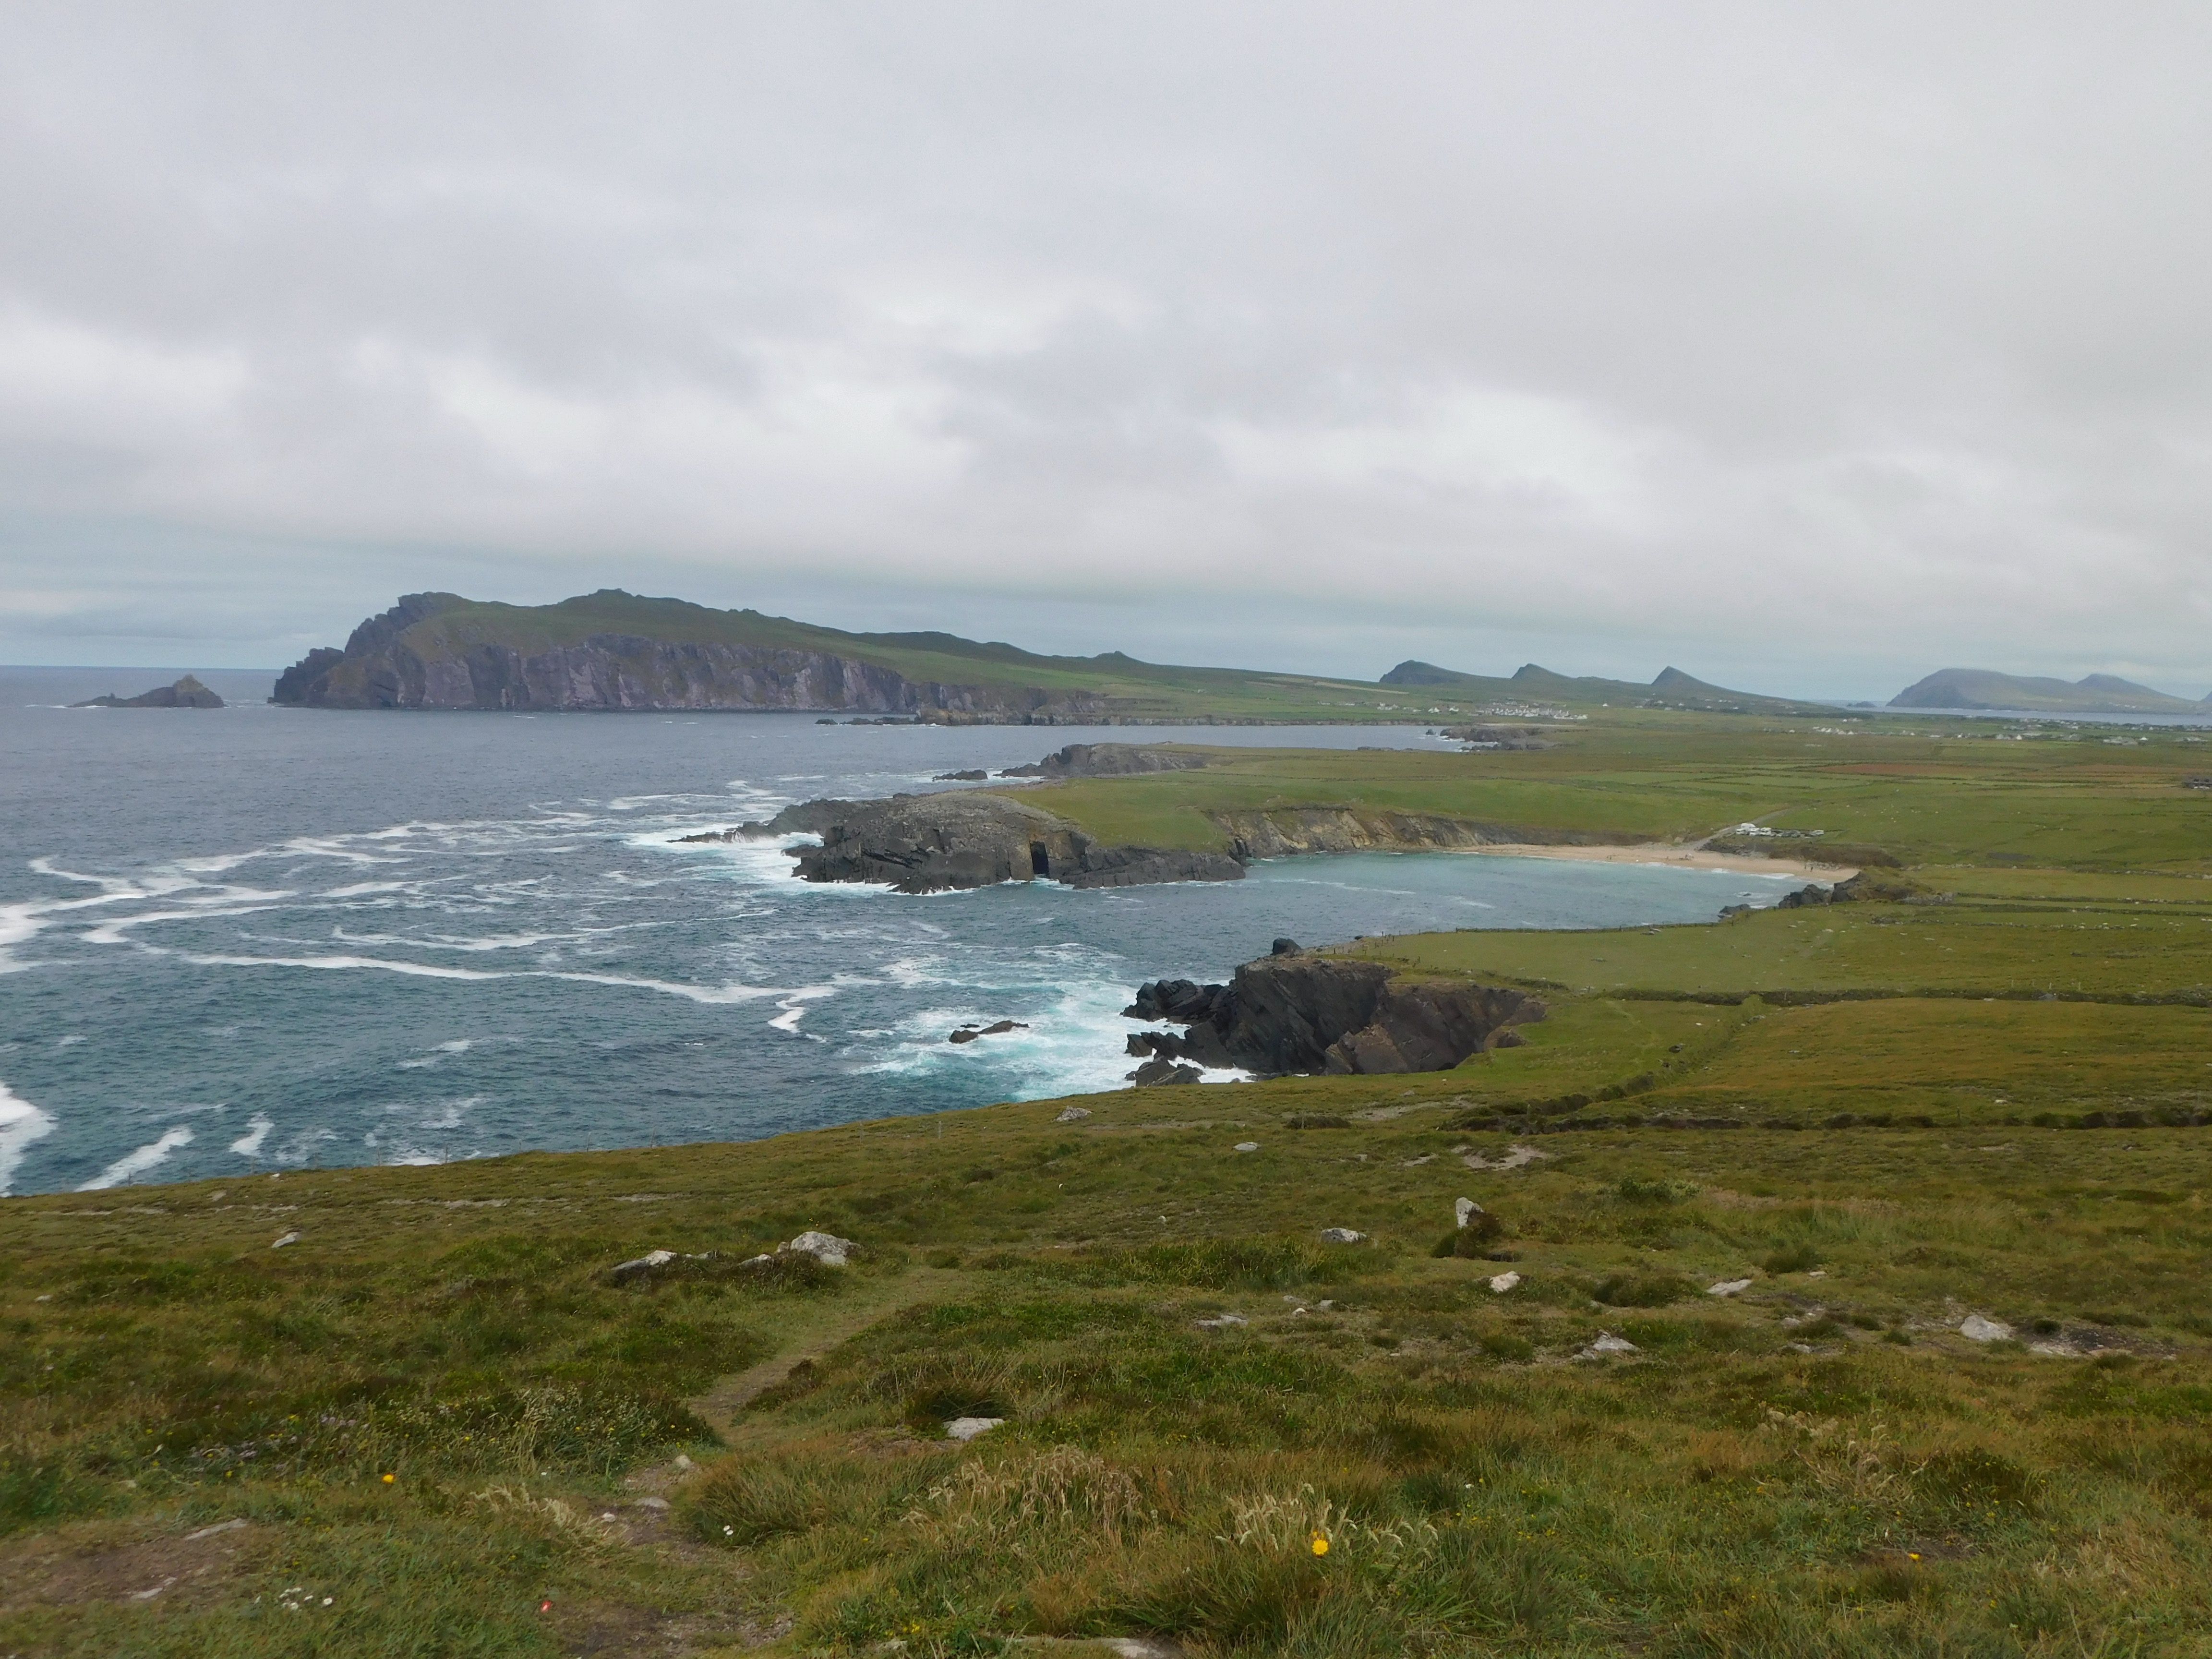 Slea Head drive on the Dingle Peninsula provided us with this spectacular view of Clogher Beach with the Three Sisters on the horizon.